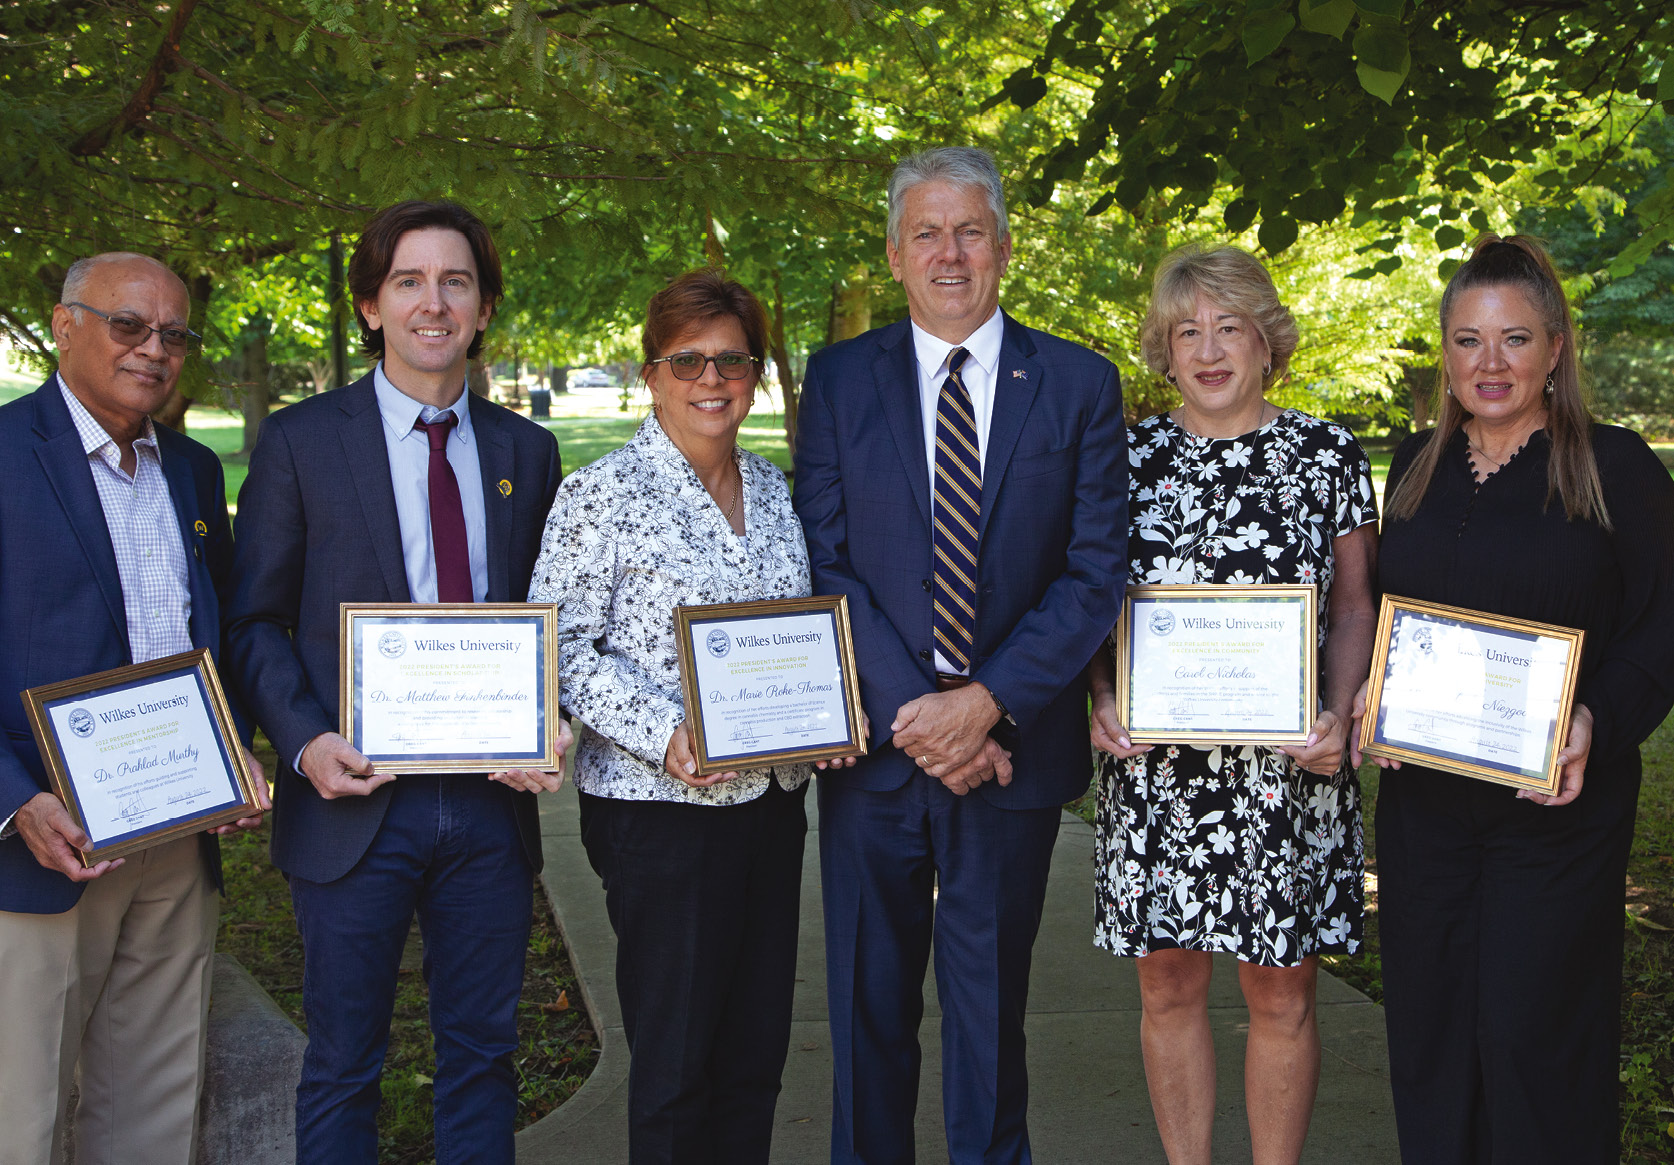 Wilkes recipients of President's Award From left, Prahlad Murthy, professor of environmental engineering; Matthew Finkenbinder, associate professor of geology; Marie Roke-Thomas, associate professor of pharmaceutical sciences; Wilkes University President Greg Cant; Carol Nicholas, director of the SHINE program; and Kimberly Niezgoda, director of the English Language Center. Absent from photo is Don Mencer, professor of chemistry.